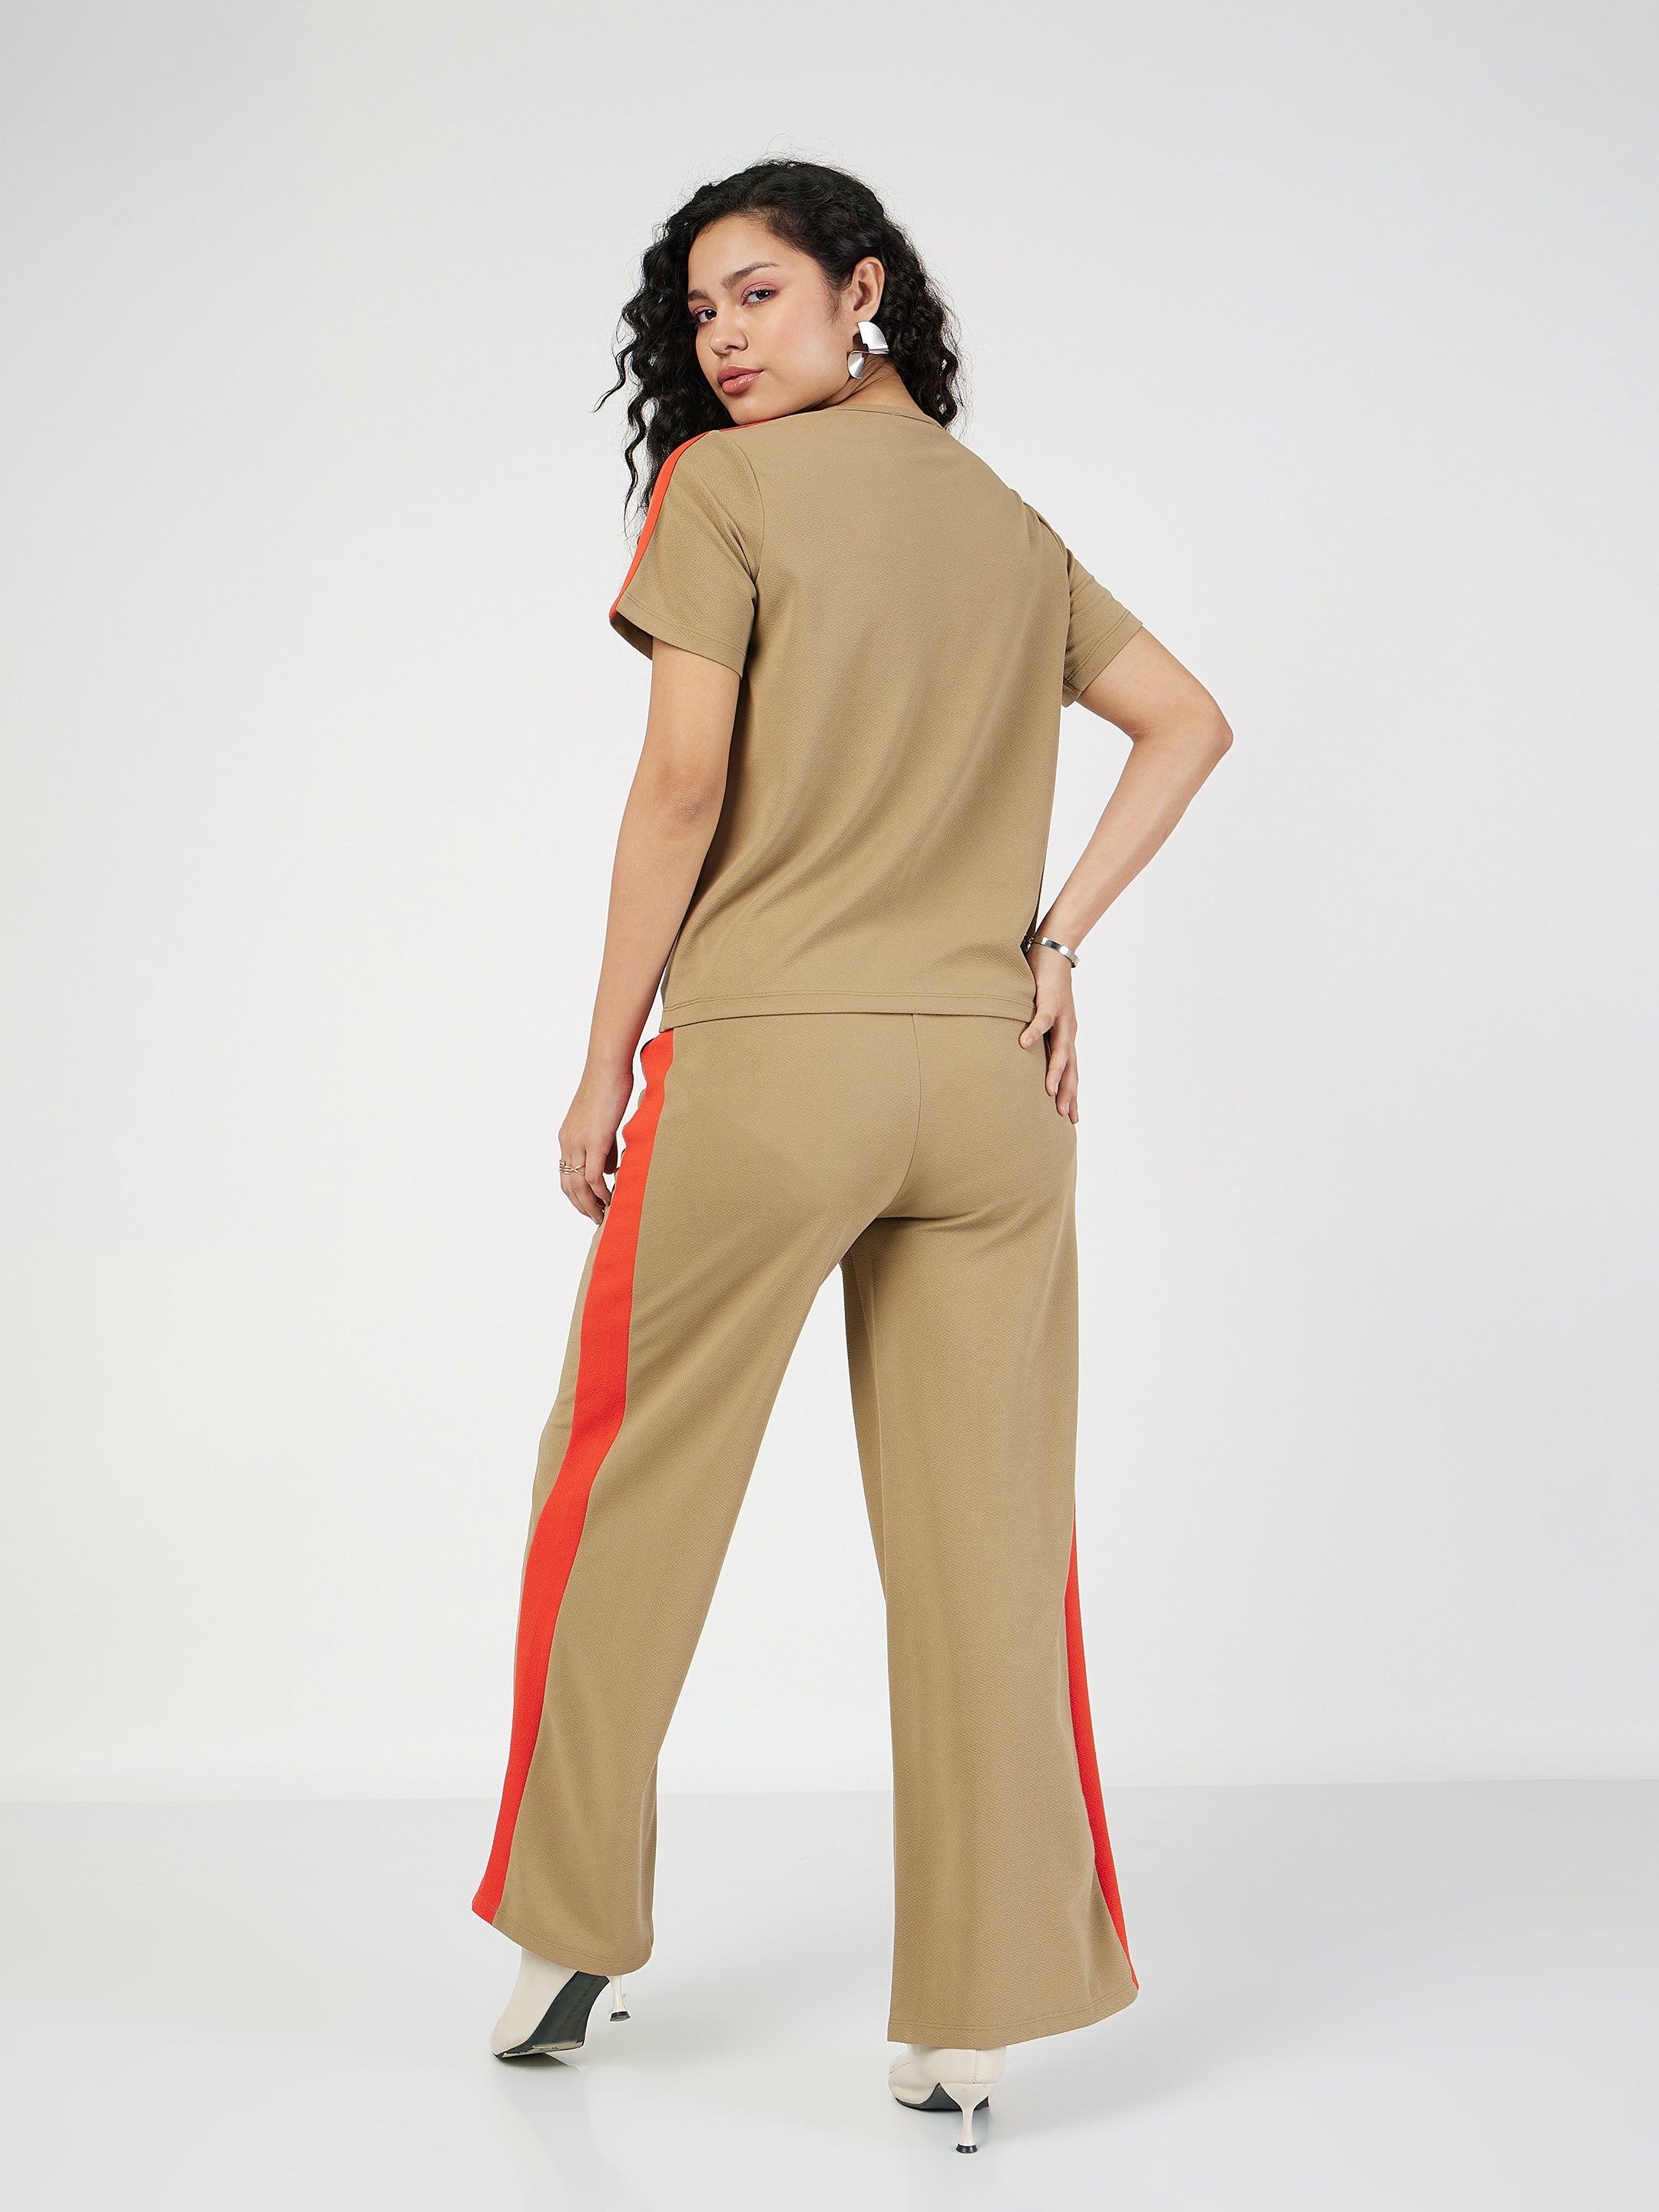 Women's Beige Contrast Tape T-Shirt With Track Pants - Lyush